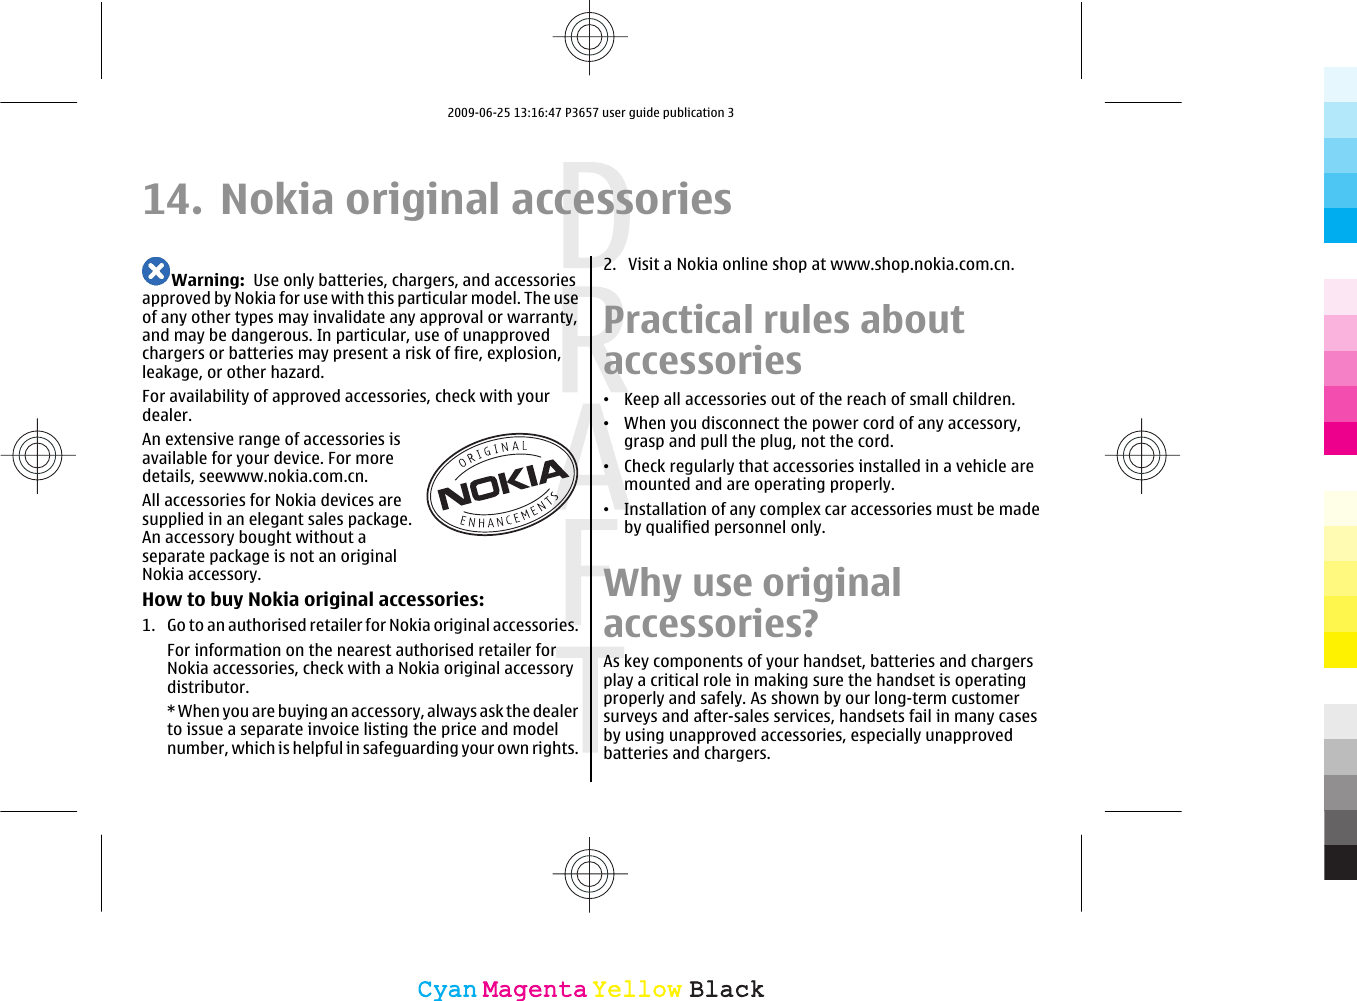 14. Nokia original accessoriesWarning:  Use only batteries, chargers, and accessoriesapproved by Nokia for use with this particular model. The useof any other types may invalidate any approval or warranty,and may be dangerous. In particular, use of unapprovedchargers or batteries may present a risk of fire, explosion,leakage, or other hazard.For availability of approved accessories, check with yourdealer.An extensive range of accessories isavailable for your device. For moredetails, seewww.nokia.com.cn.All accessories for Nokia devices aresupplied in an elegant sales package.An accessory bought without aseparate package is not an originalNokia accessory.How to buy Nokia original accessories:1. Go to an authorised retailer for Nokia original accessories.For information on the nearest authorised retailer forNokia accessories, check with a Nokia original accessorydistributor.* When you are buying an accessory, always ask the dealerto issue a separate invoice listing the price and modelnumber, which is helpful in safeguarding your own rights.2. Visit a Nokia online shop at www.shop.nokia.com.cn.Practical rules aboutaccessories•Keep all accessories out of the reach of small children.•When you disconnect the power cord of any accessory,grasp and pull the plug, not the cord.•Check regularly that accessories installed in a vehicle aremounted and are operating properly.•Installation of any complex car accessories must be madeby qualified personnel only.Why use originalaccessories?As key components of your handset, batteries and chargersplay a critical role in making sure the handset is operatingproperly and safely. As shown by our long-term customersurveys and after-sales services, handsets fail in many casesby using unapproved accessories, especially unapprovedbatteries and chargers.CyanCyanMagentaMagentaYellowYellowBlackBlack2009-06-25 13:16:47 P3657 user guide publication 3